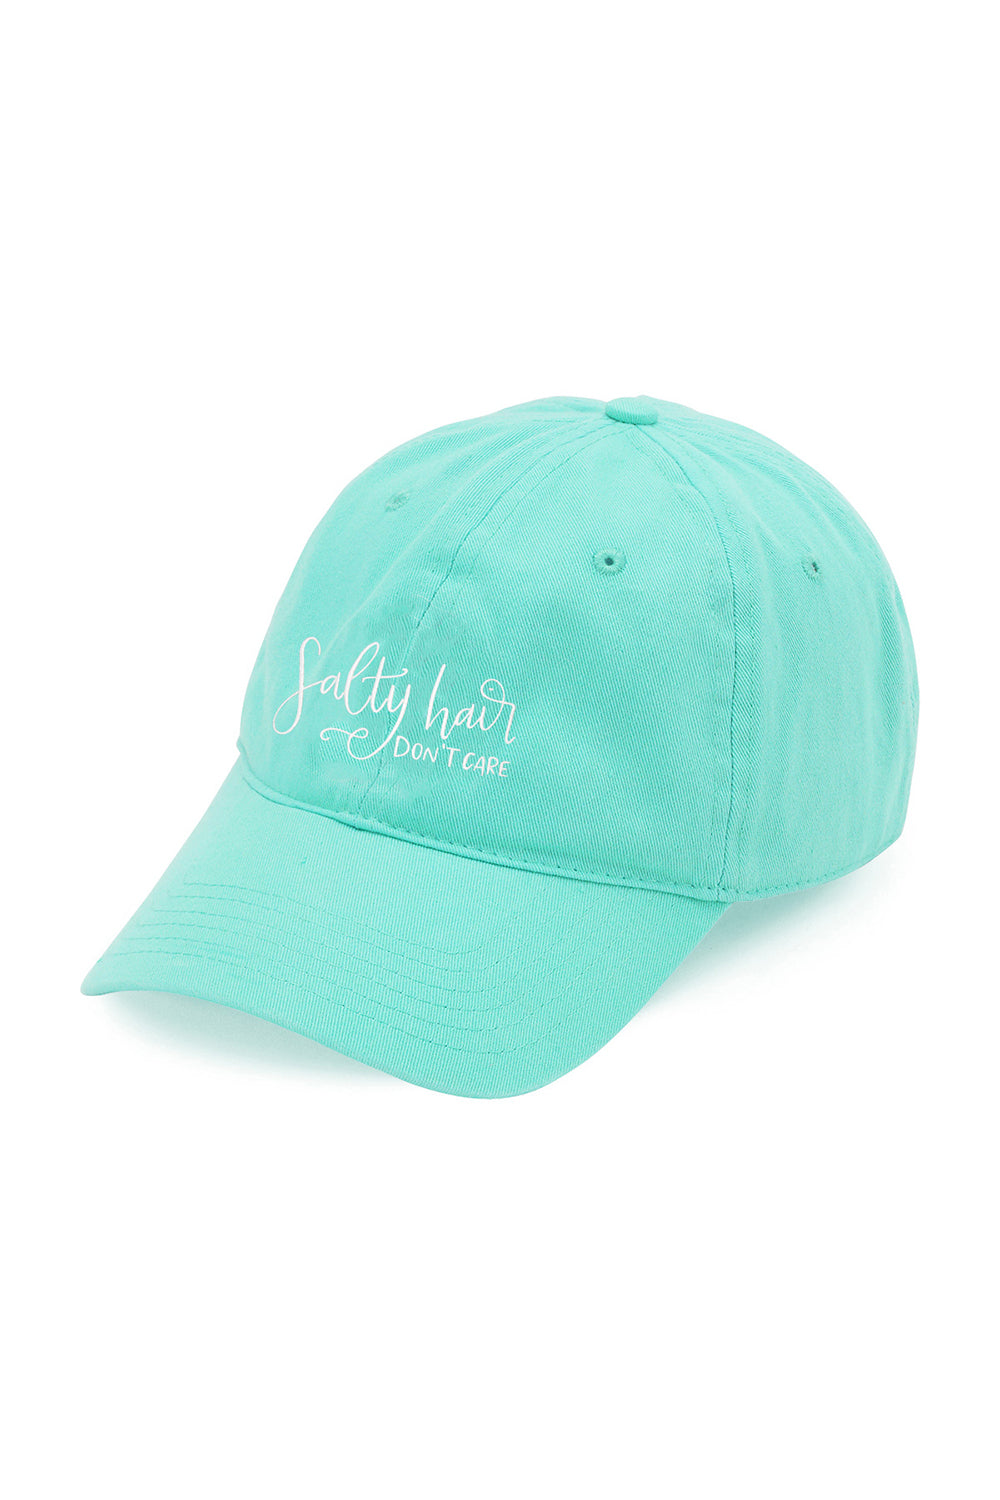 "Salty Hair Don't Care" Embroidered Cap - Mint | Makk Fashions